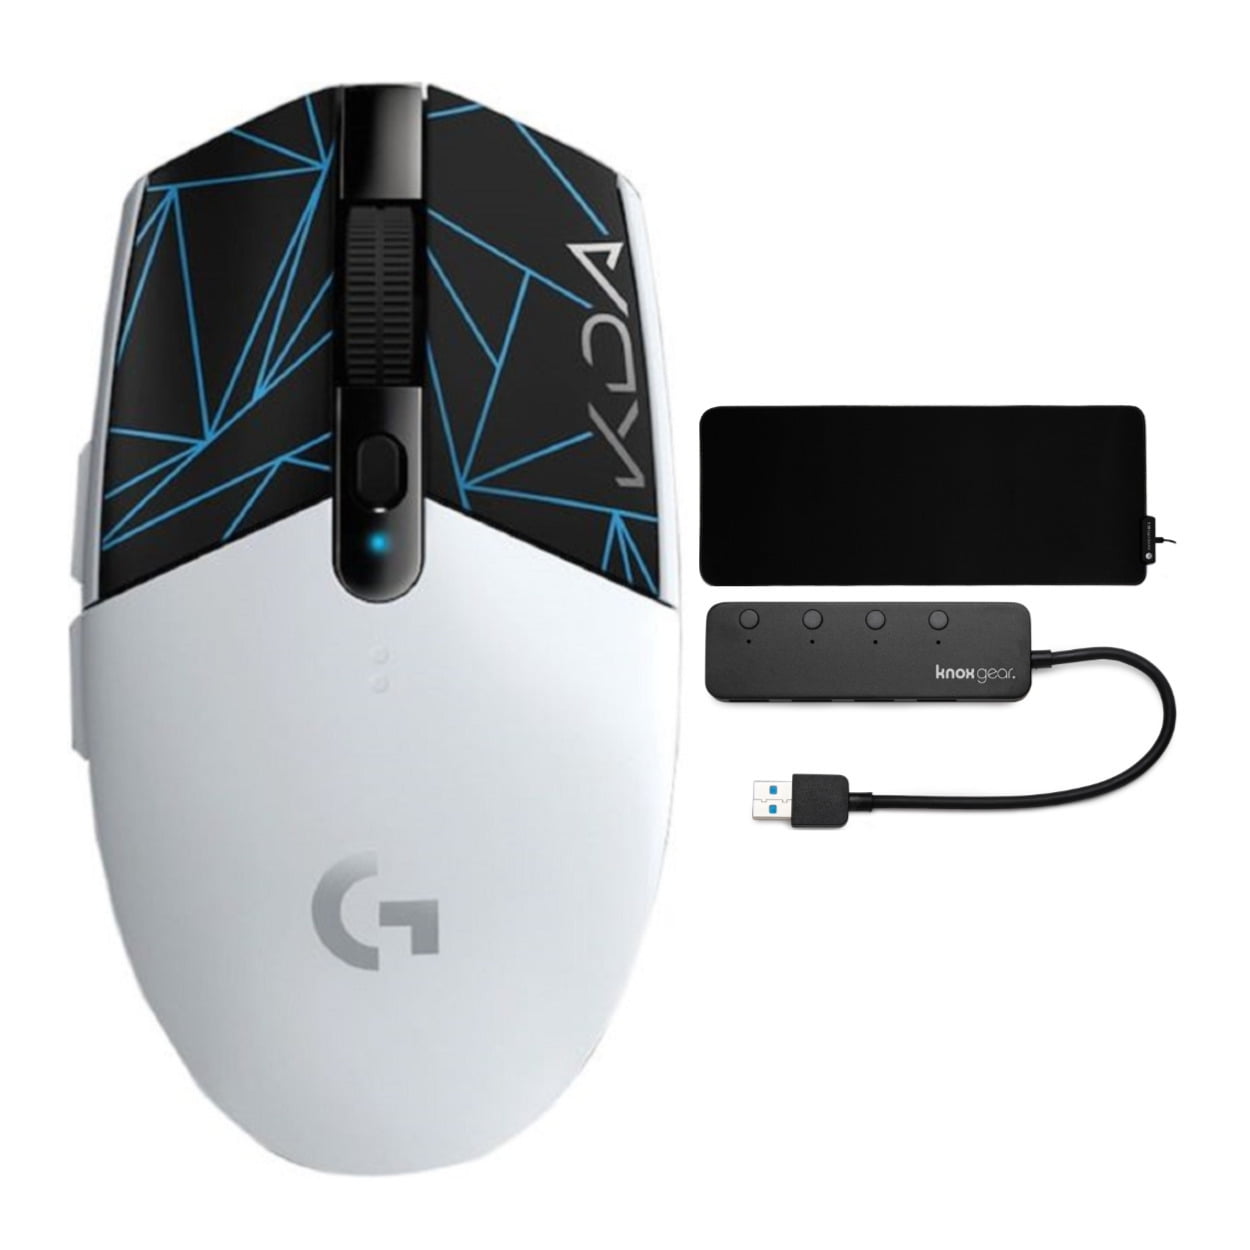 Logitech Pro Wireless Gaming Mouse Bundle with Gaming Mouse and USB Hub - Walmart.com